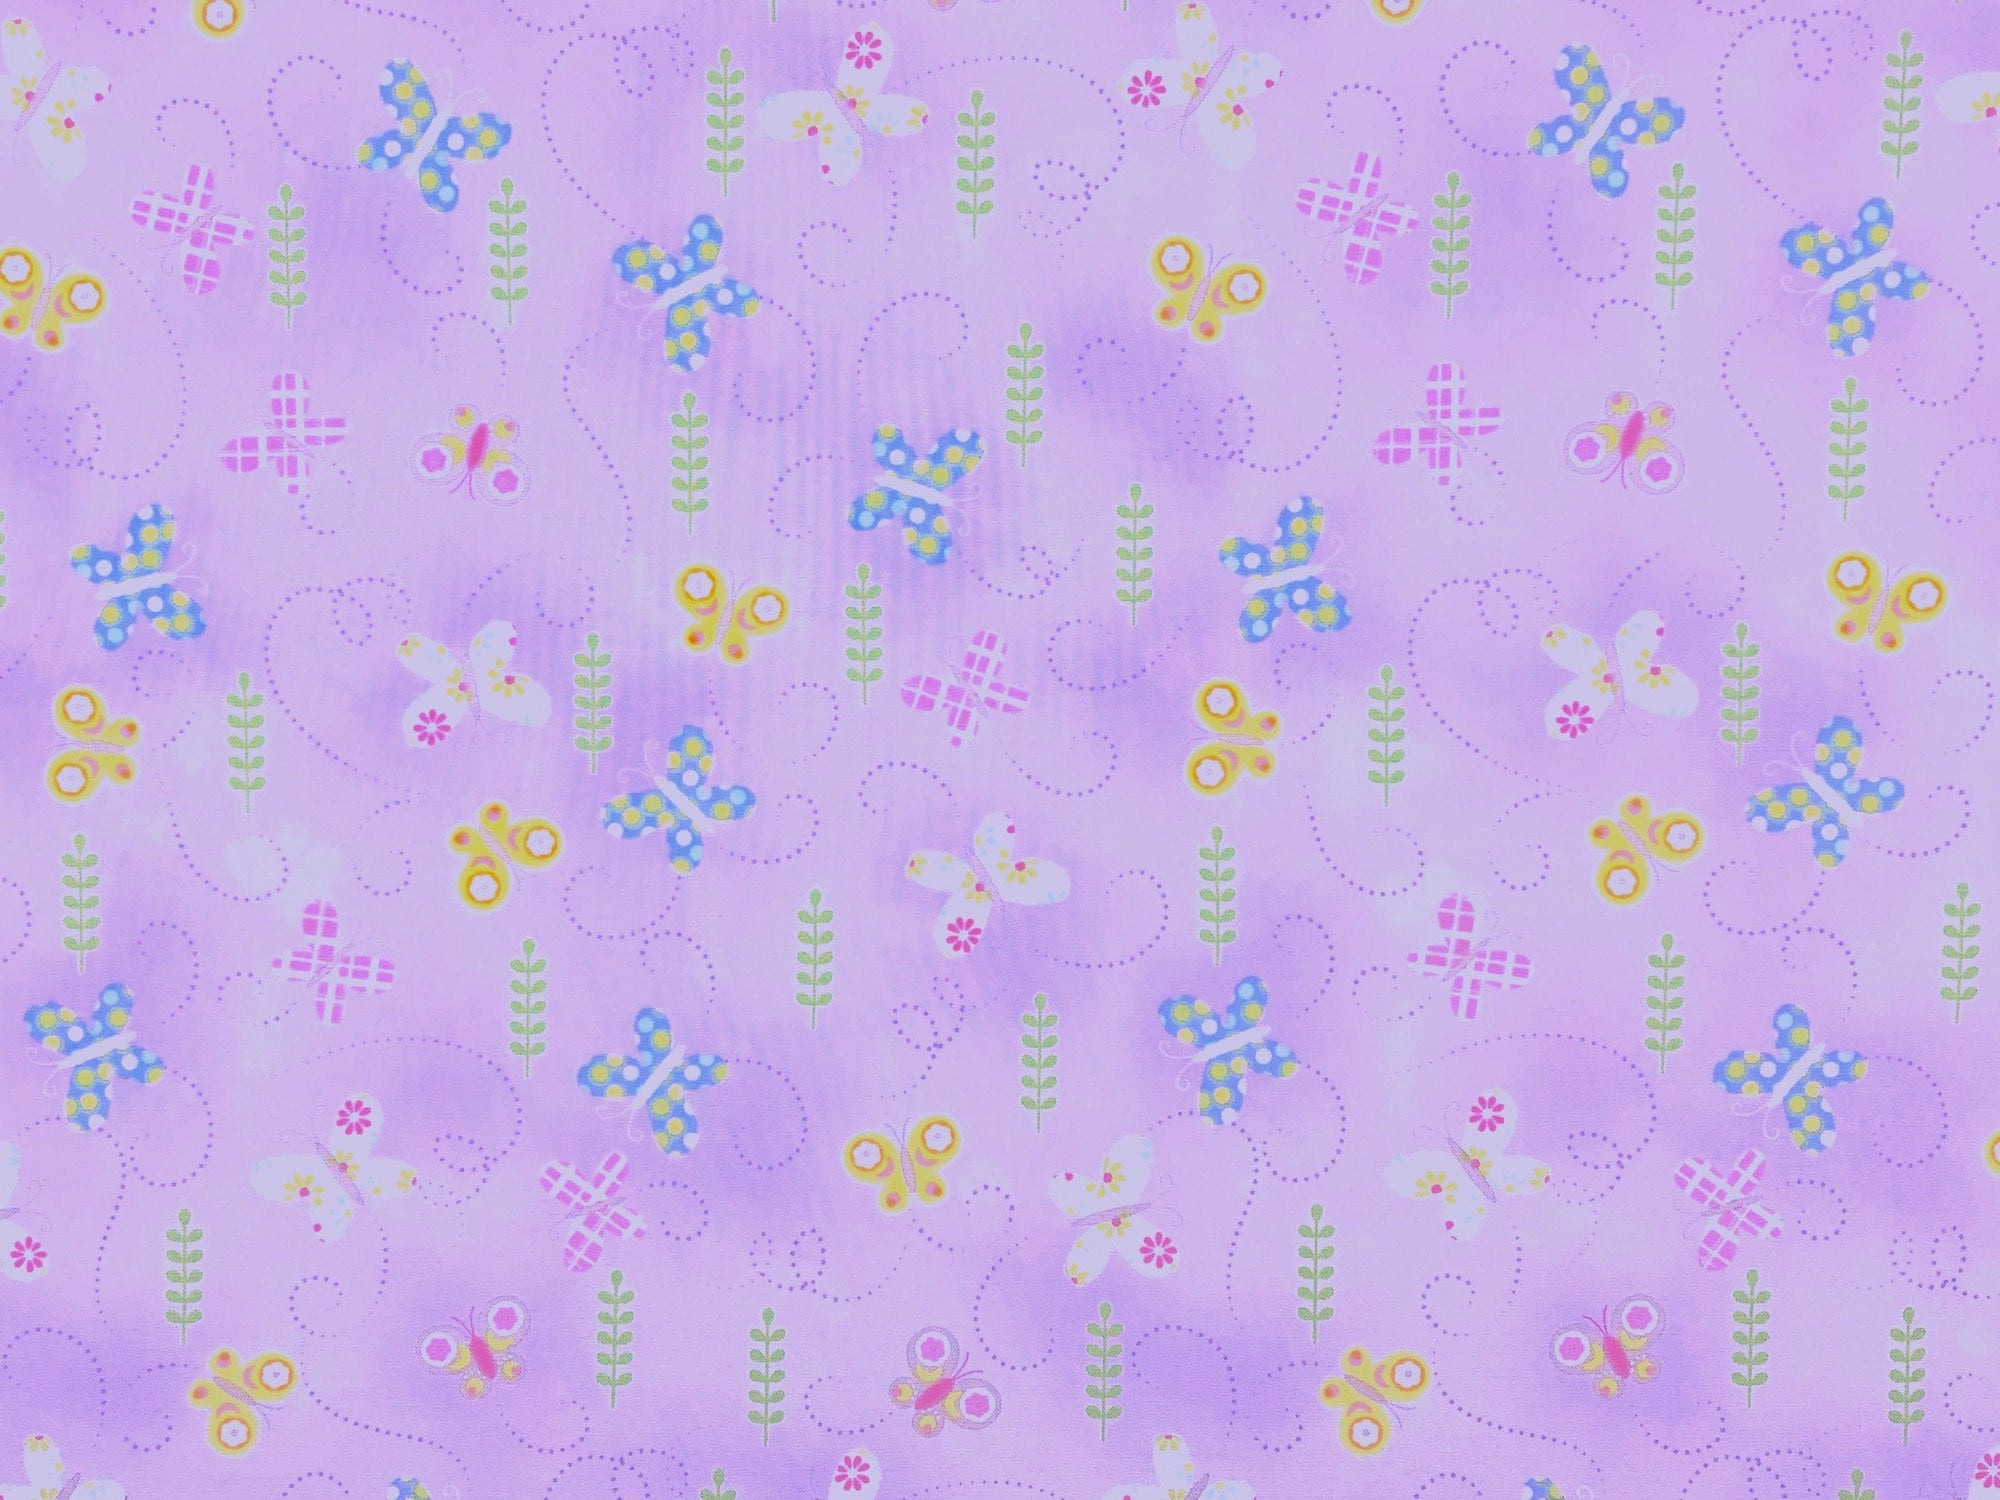 This fabric is a called Springtime Butterflies and is covered with butterflies. The butterflies are a mix of blue, yellow, pink, white and green. This fabric is part of the Hippity Hoppity collection